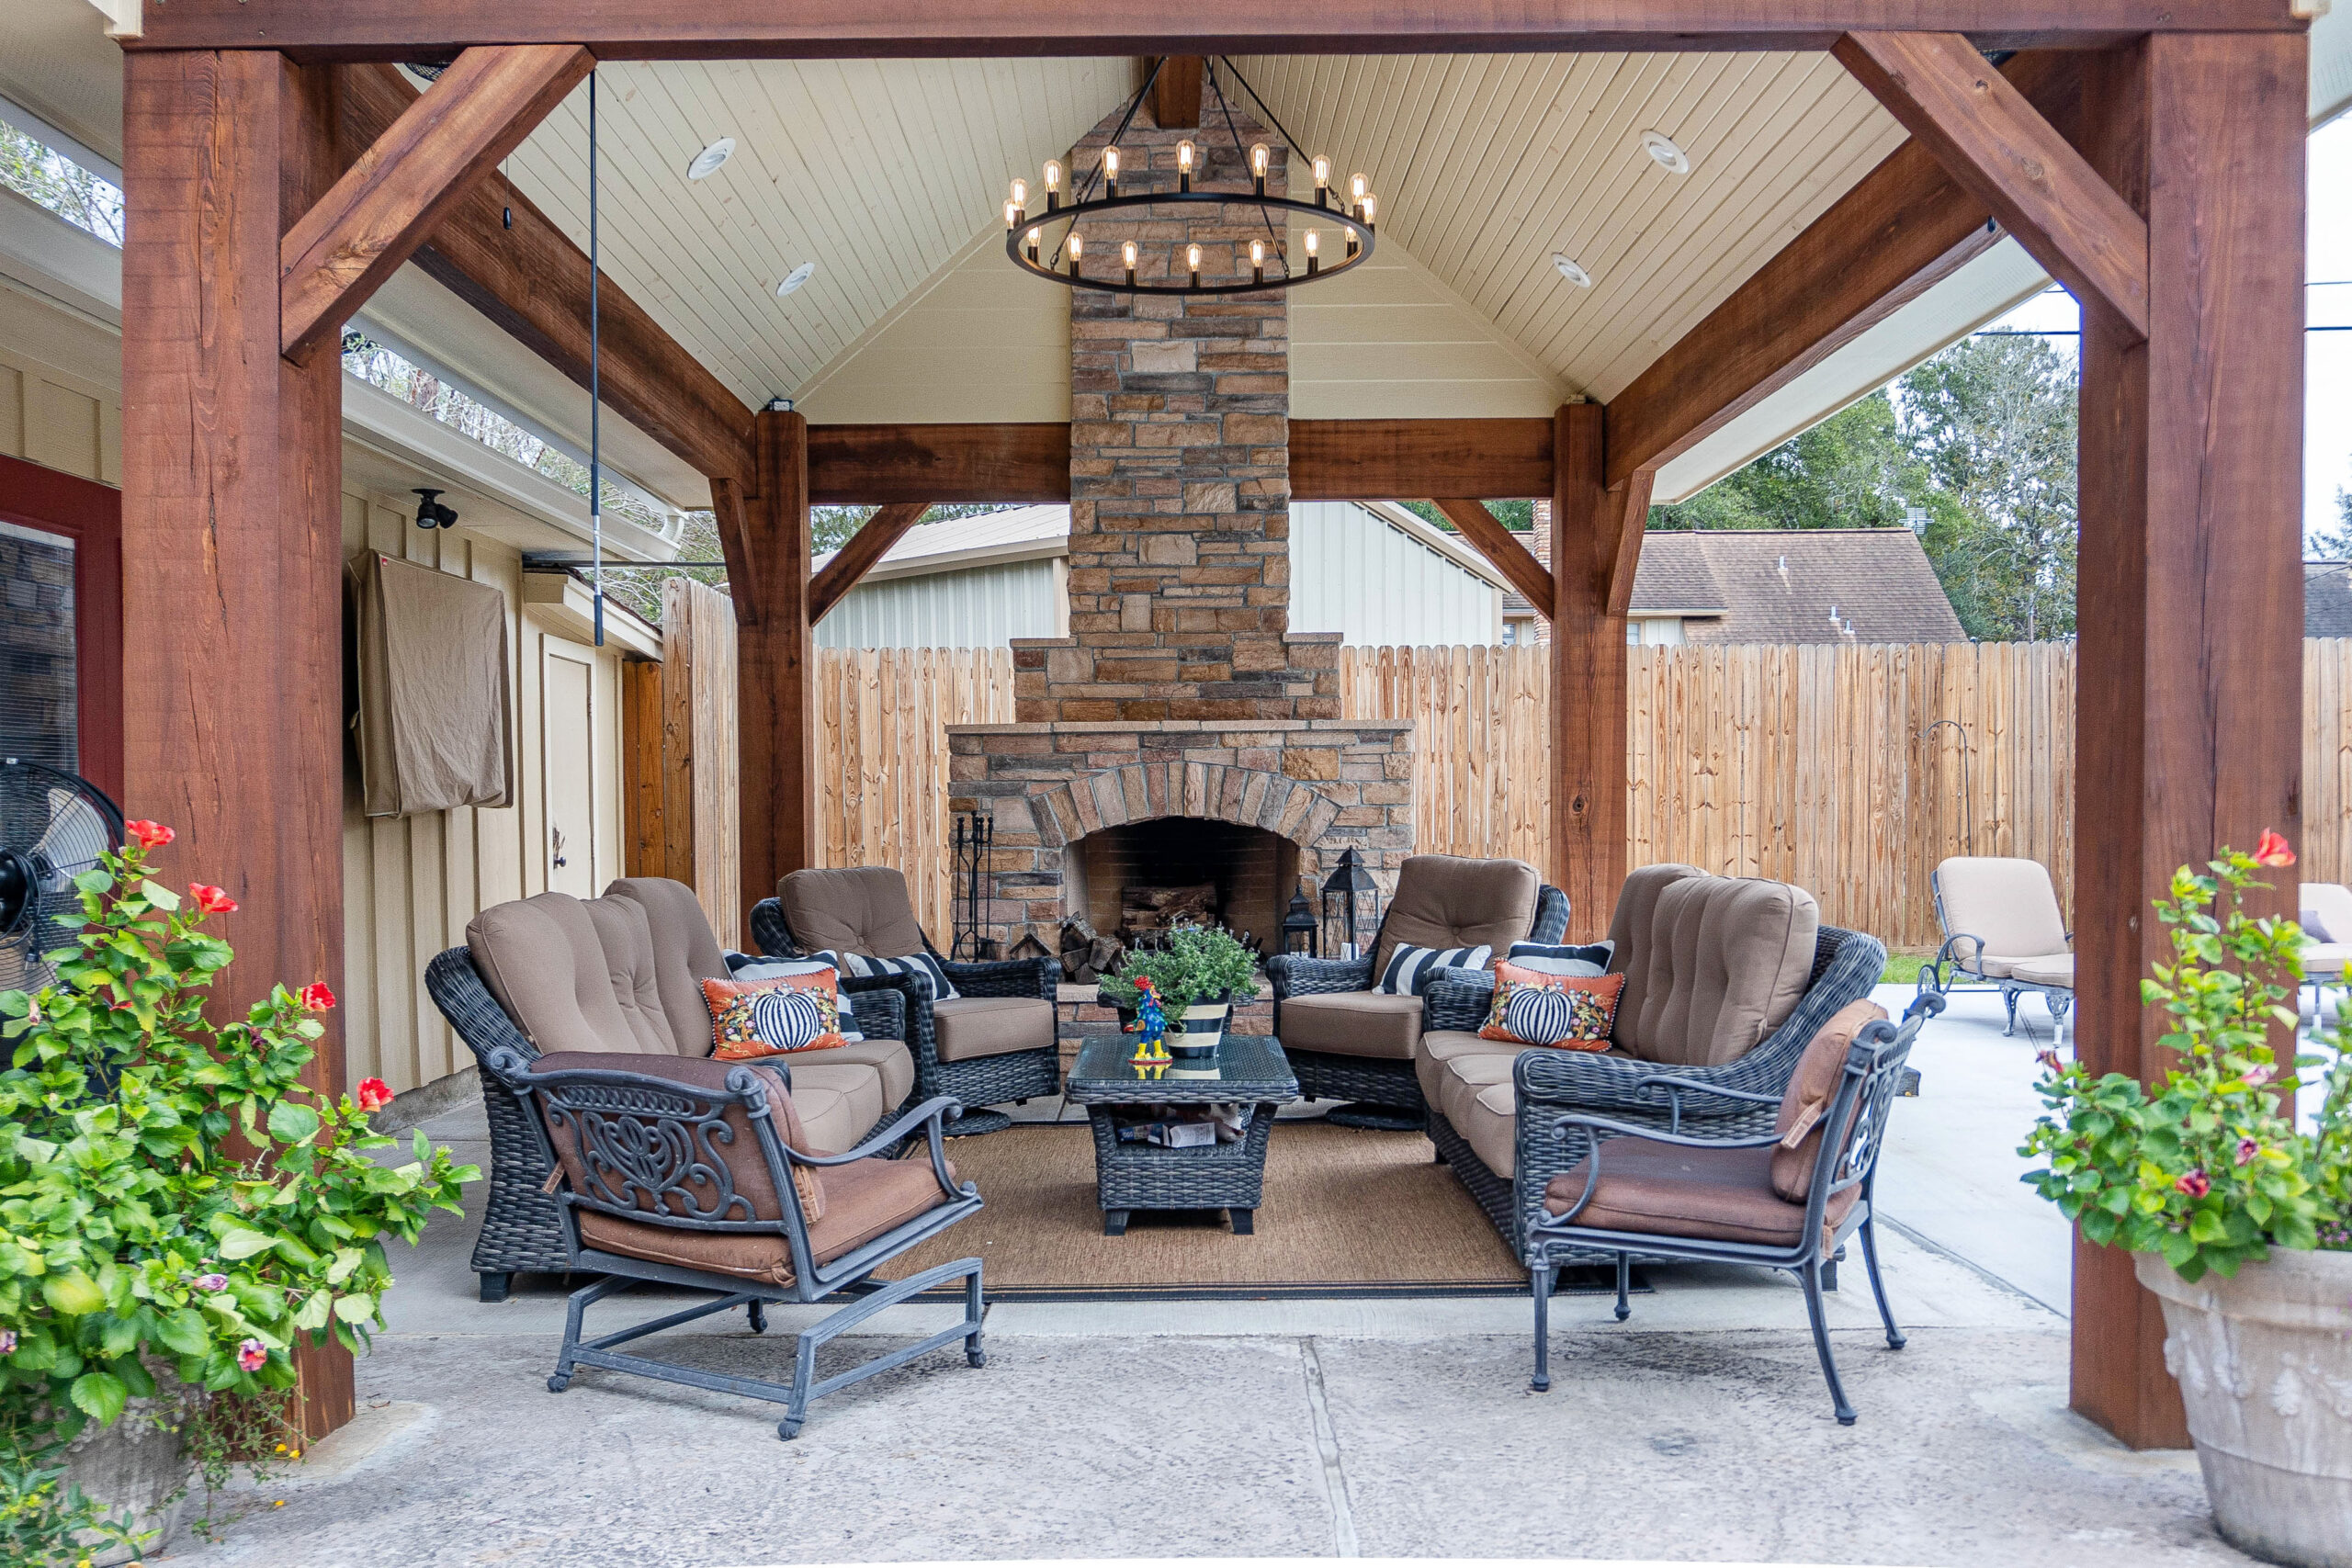 Continental classic home patio wicker patio furniture with cushions stone custom built fireplace stain wood columns beams